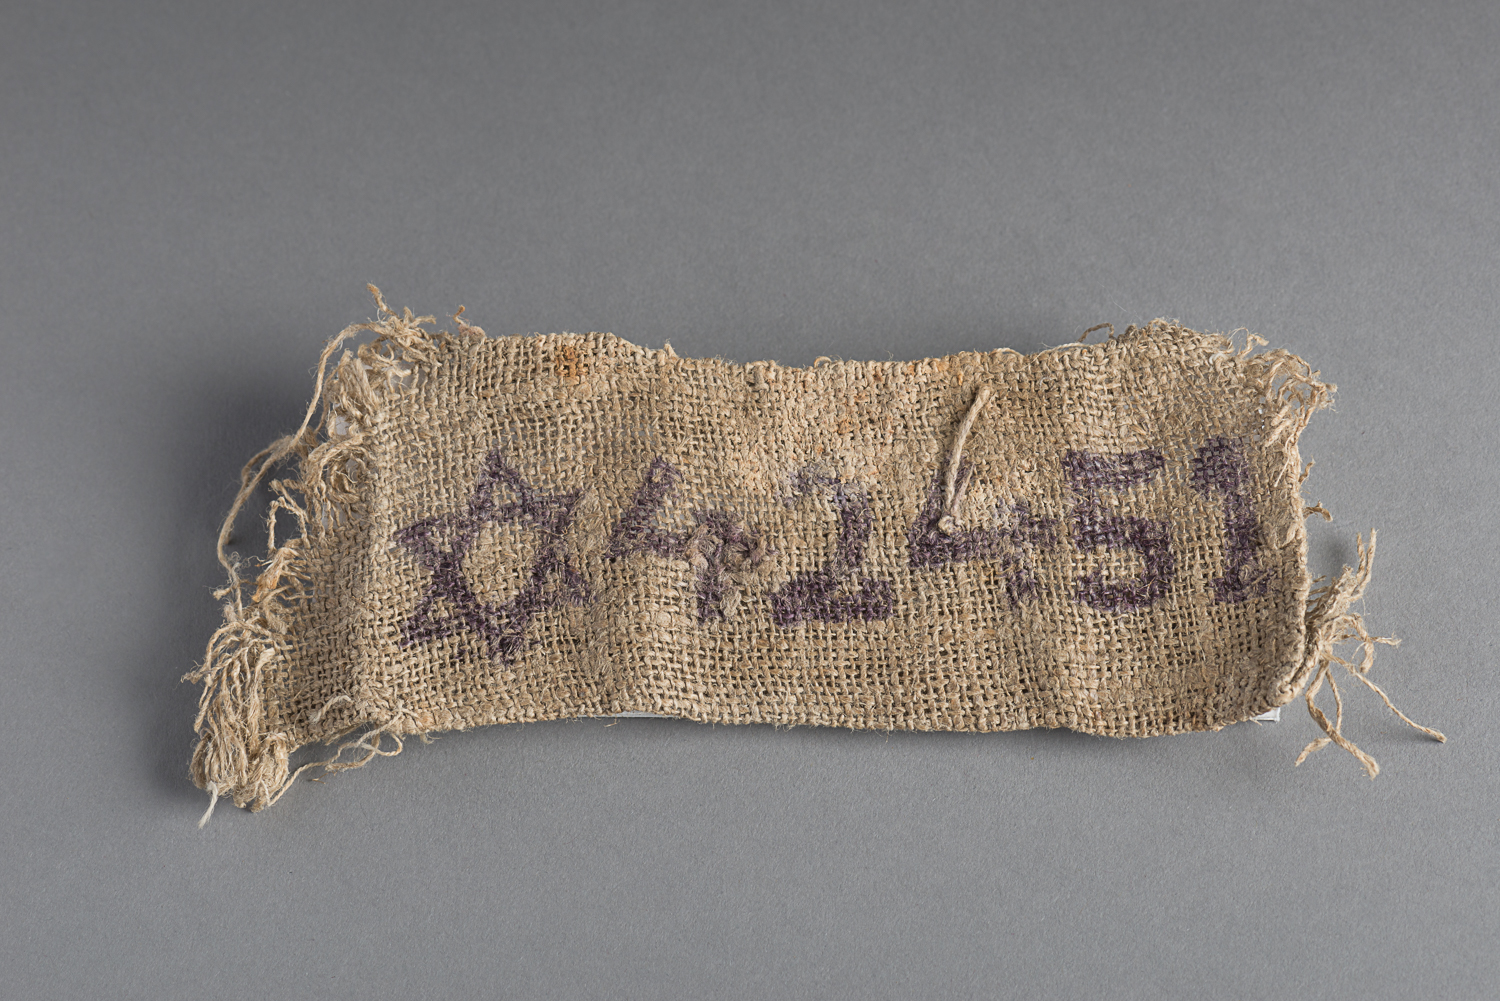 This identification tag was given to Rosa Pliskin-Sokolinski upon her arrival at Stutthof camp. (Photo: Peter Berra)